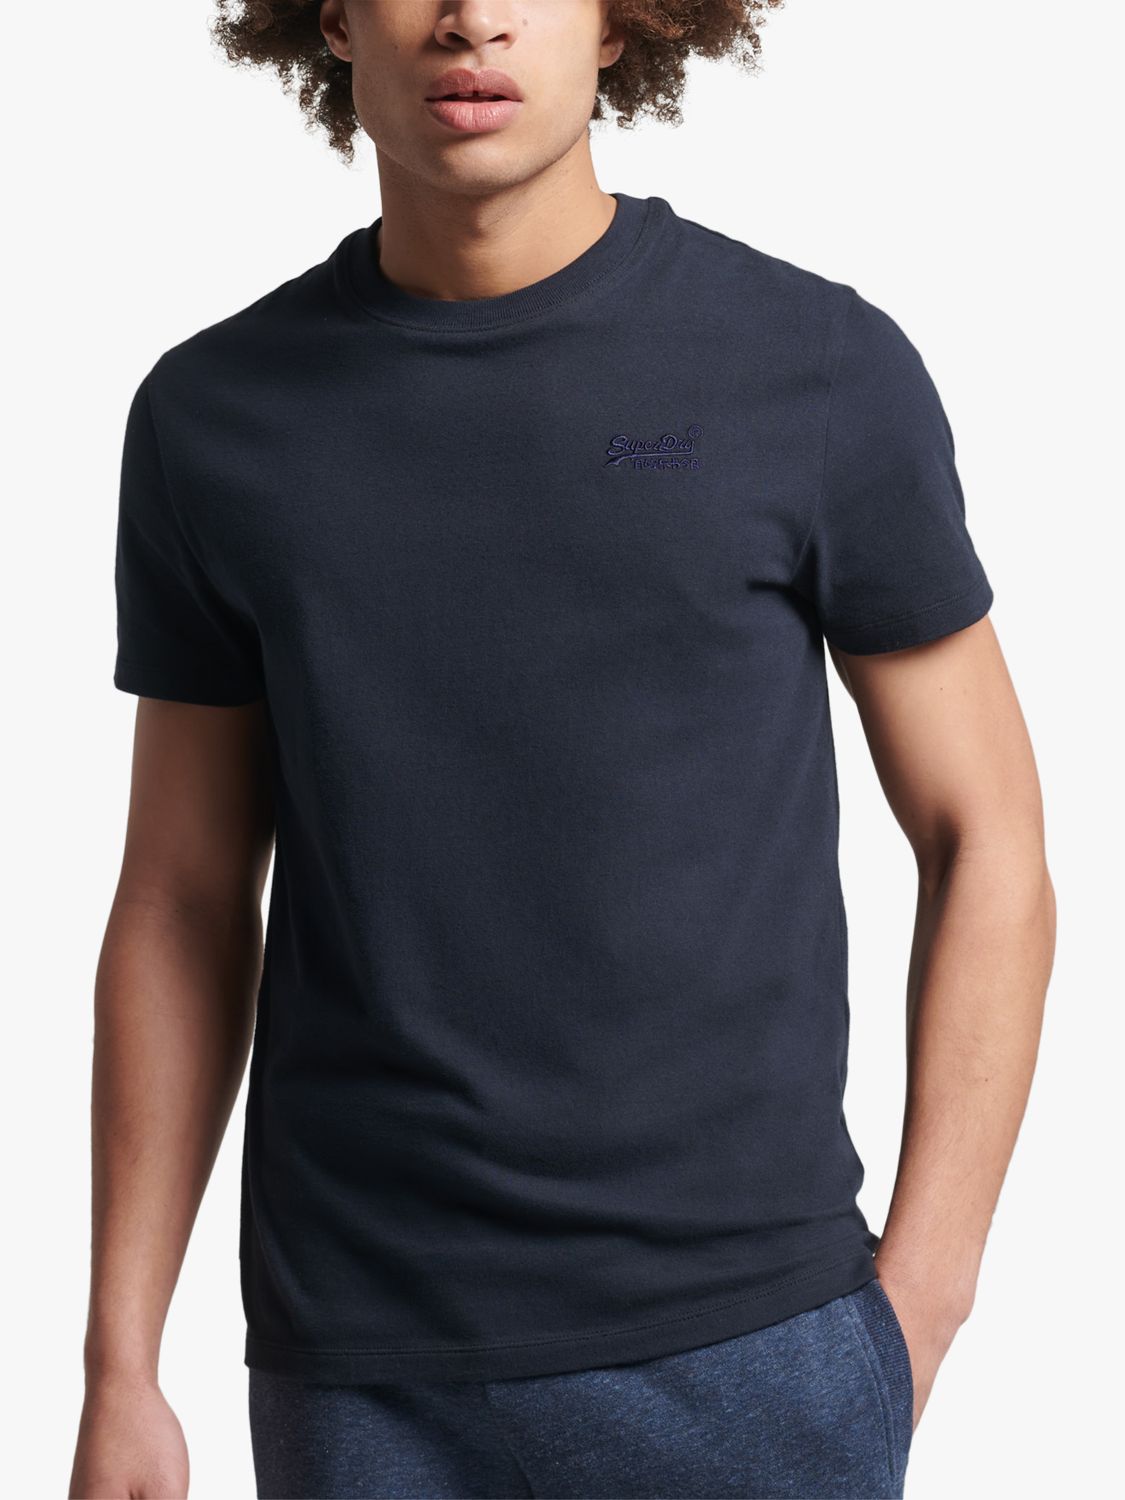 Superdry Organic Cotton Vintage Logo Navy Eclipse T-Shirt, Embroidered at John Partners Lewis 